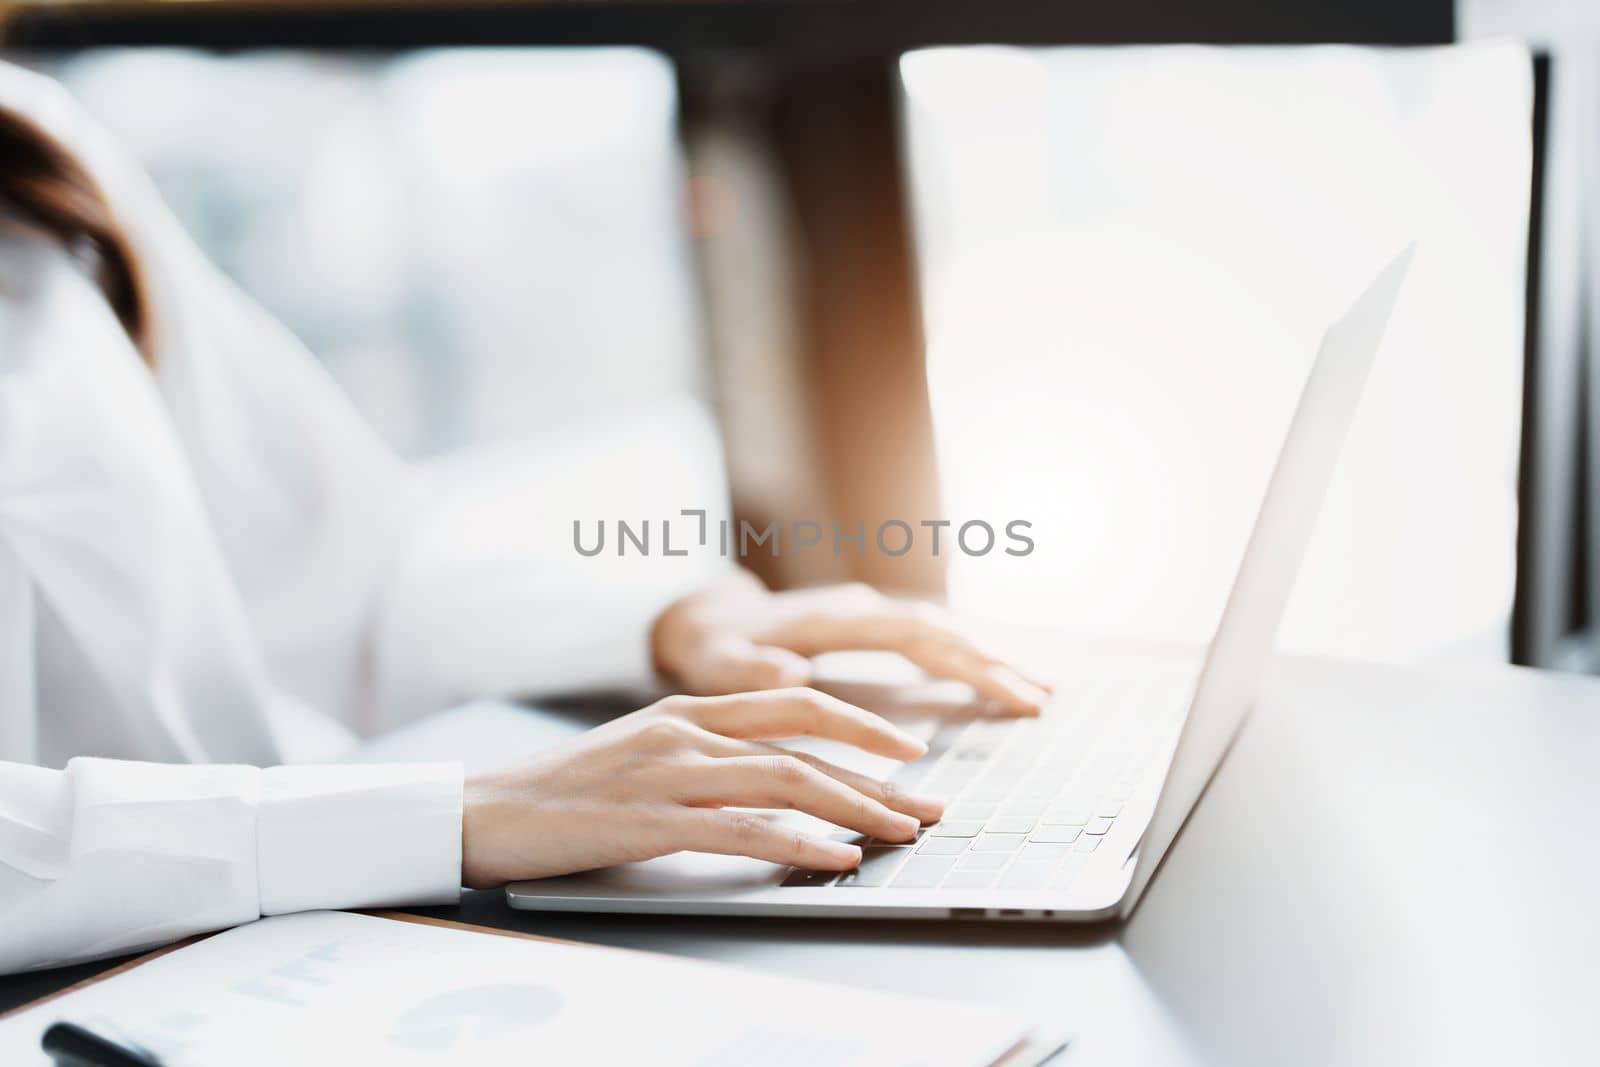 Portrait of a business woman working on a computer at work by Manastrong